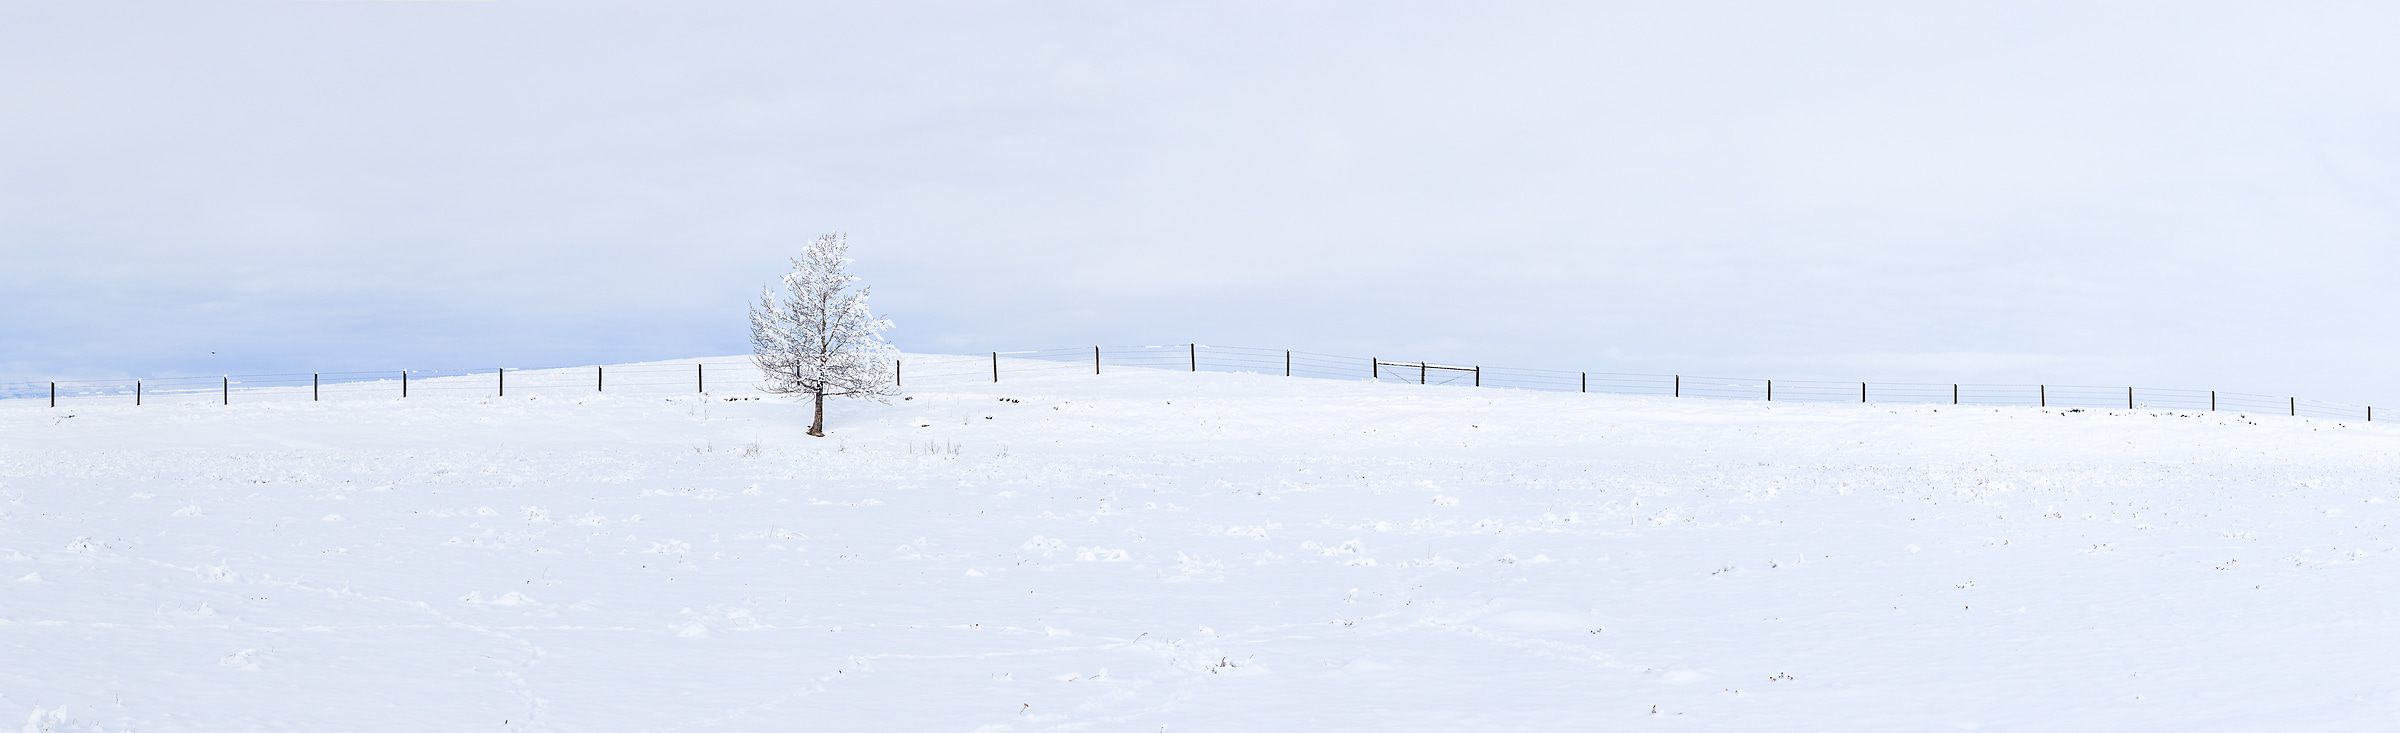 564 megapixels! A very high resolution, large-format VAST photo print of a snowy field with a tree; landscape photograph created by Scott Dimond in Cayley, Alberta, Canada